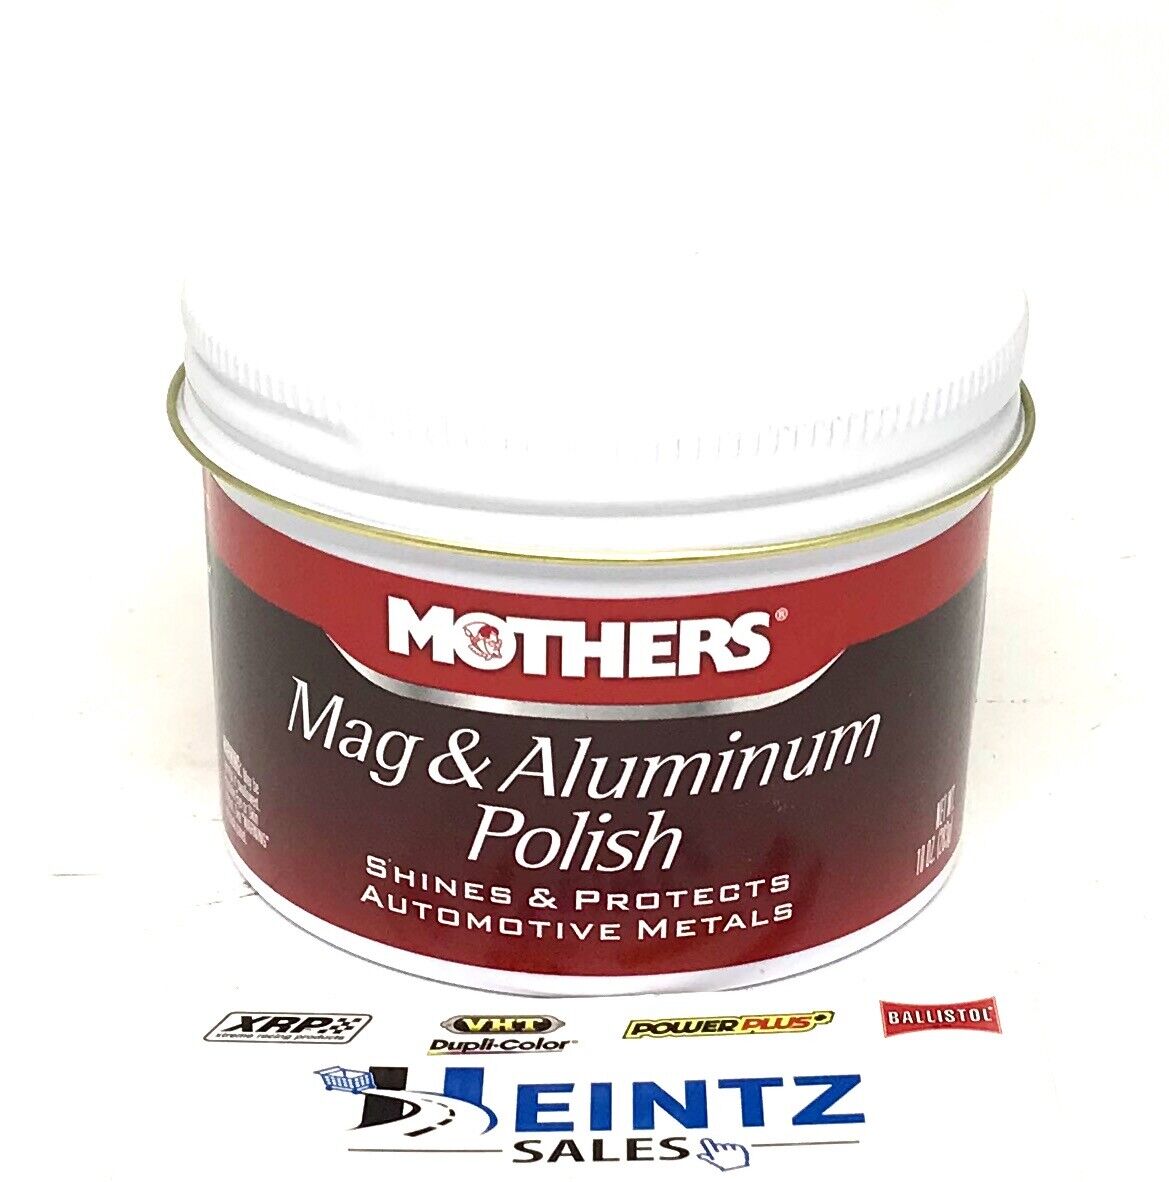 Mother's Mag & Aluminum Polish Composition/Ingredients - Reel Talk - ORCA